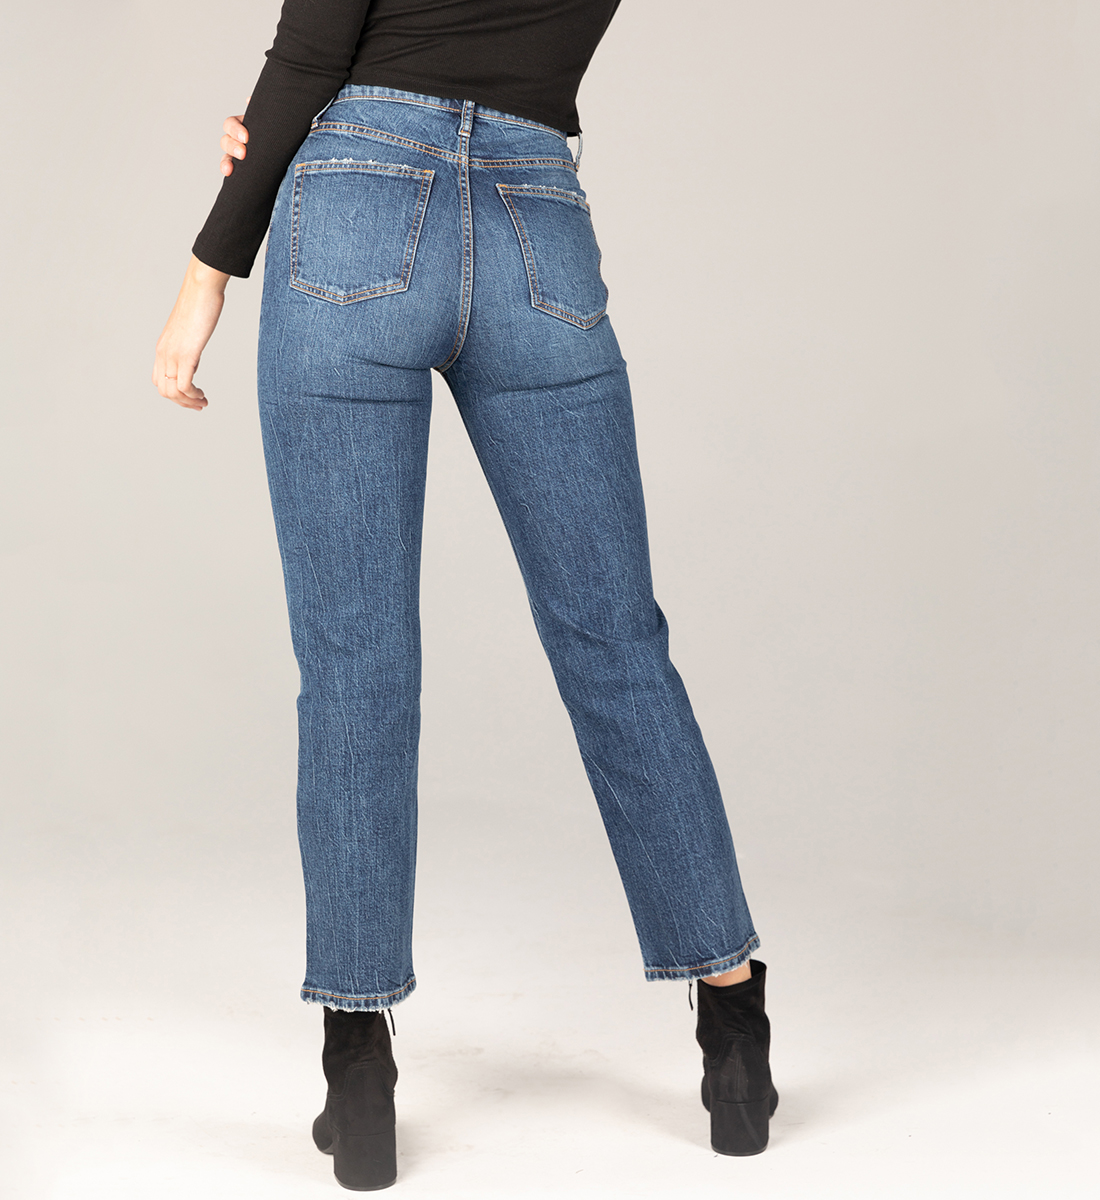 Highly Desirable Super High Rise Straight Leg Jeans - Silver Jeans US